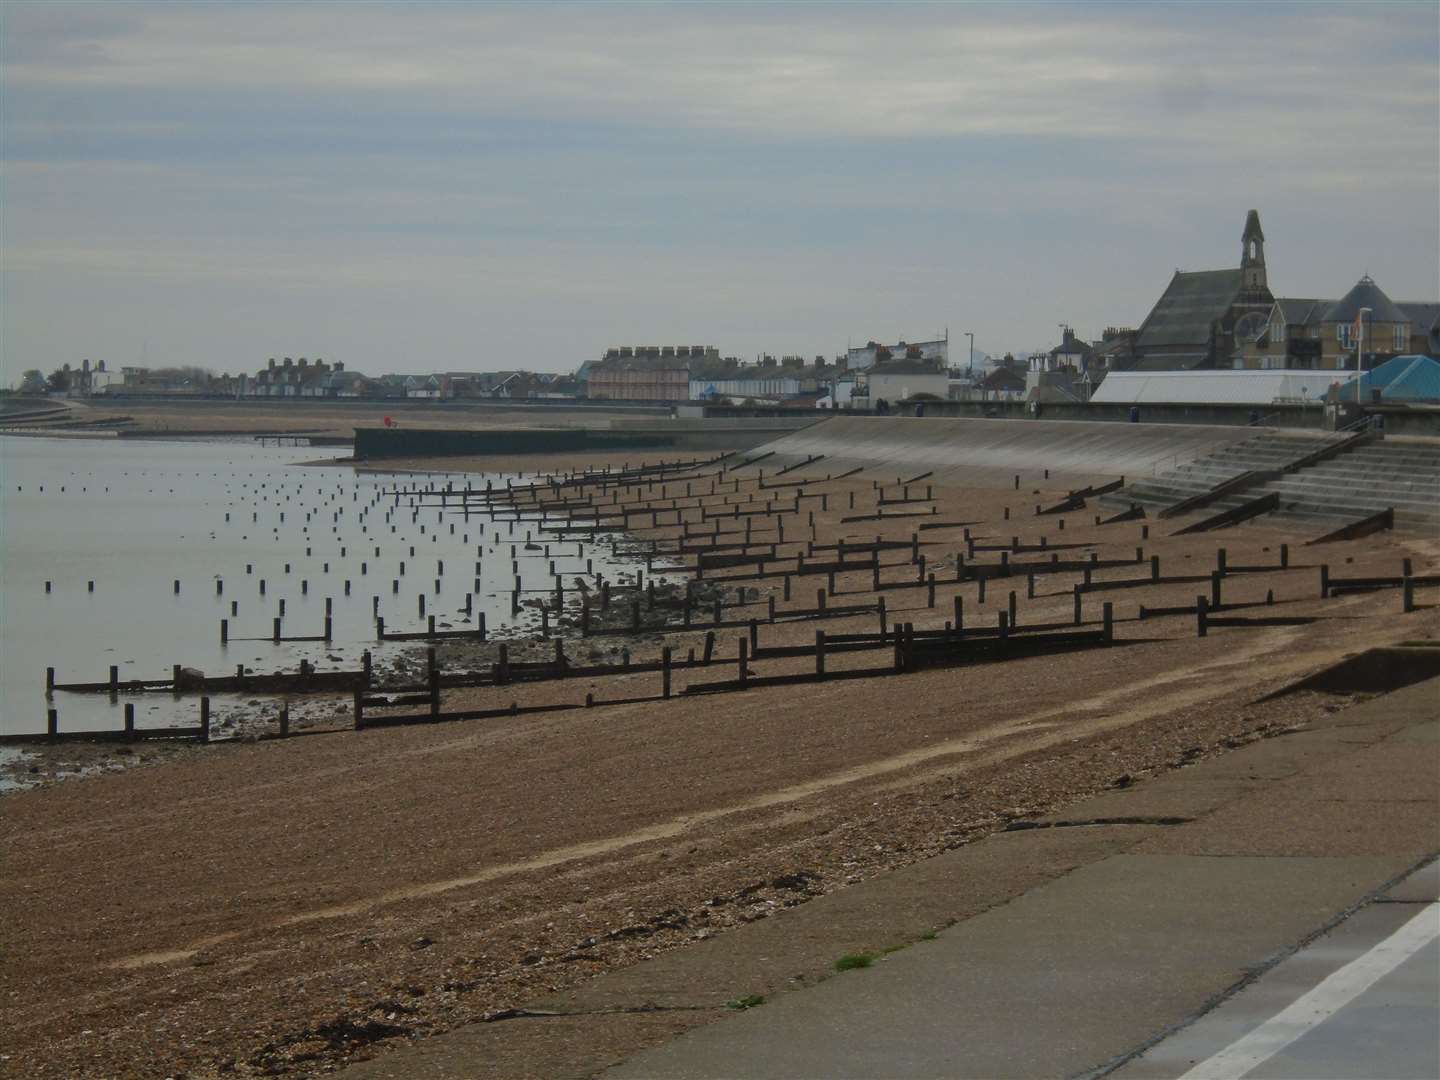 A 15-year-old girl was rescued in a rubber dinghy near Sheerness beach